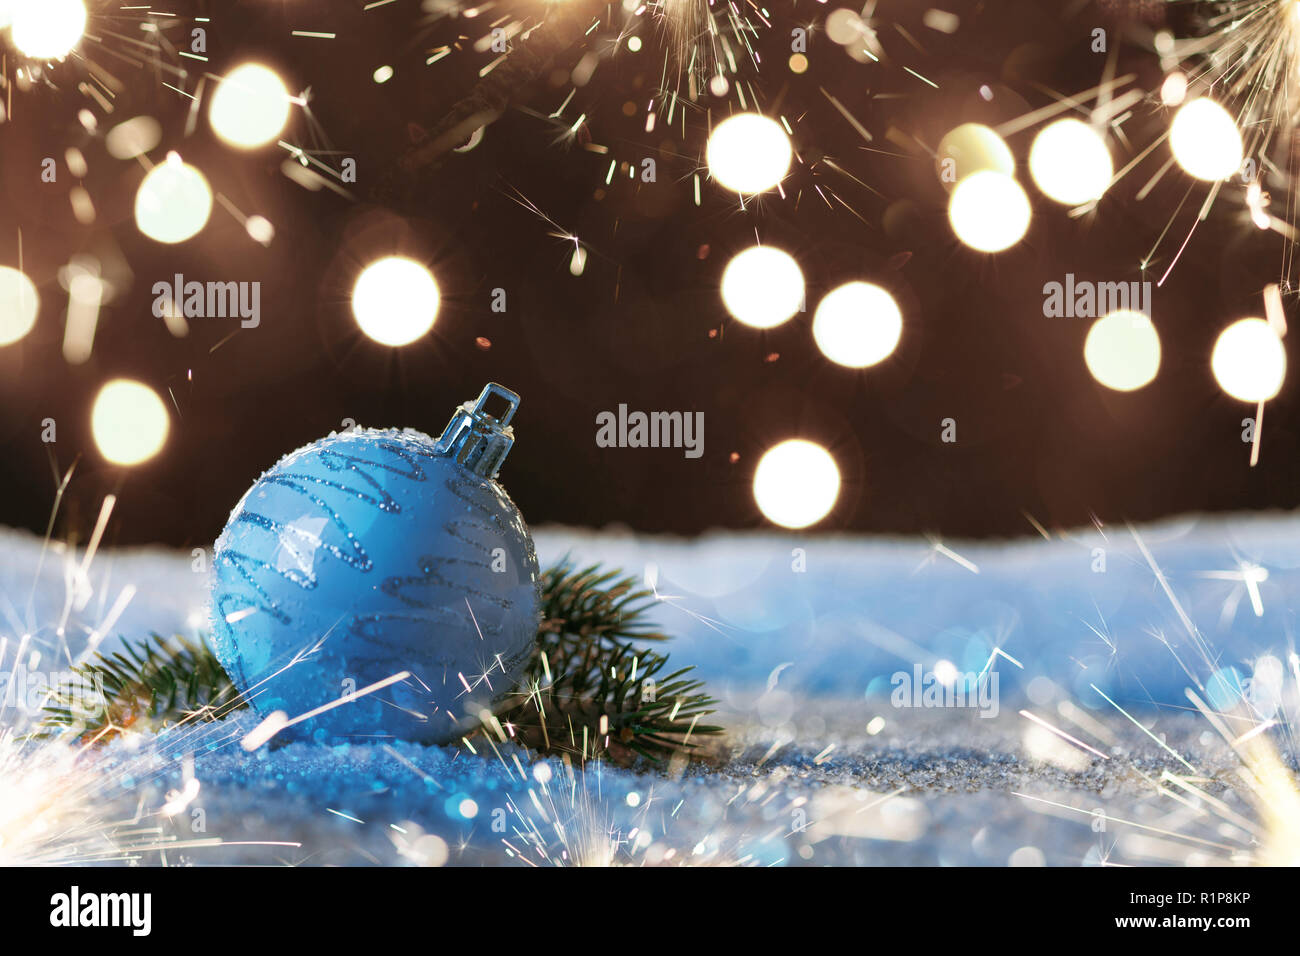 Christmas ball with sparklers and garlands on the snow Stock Photo